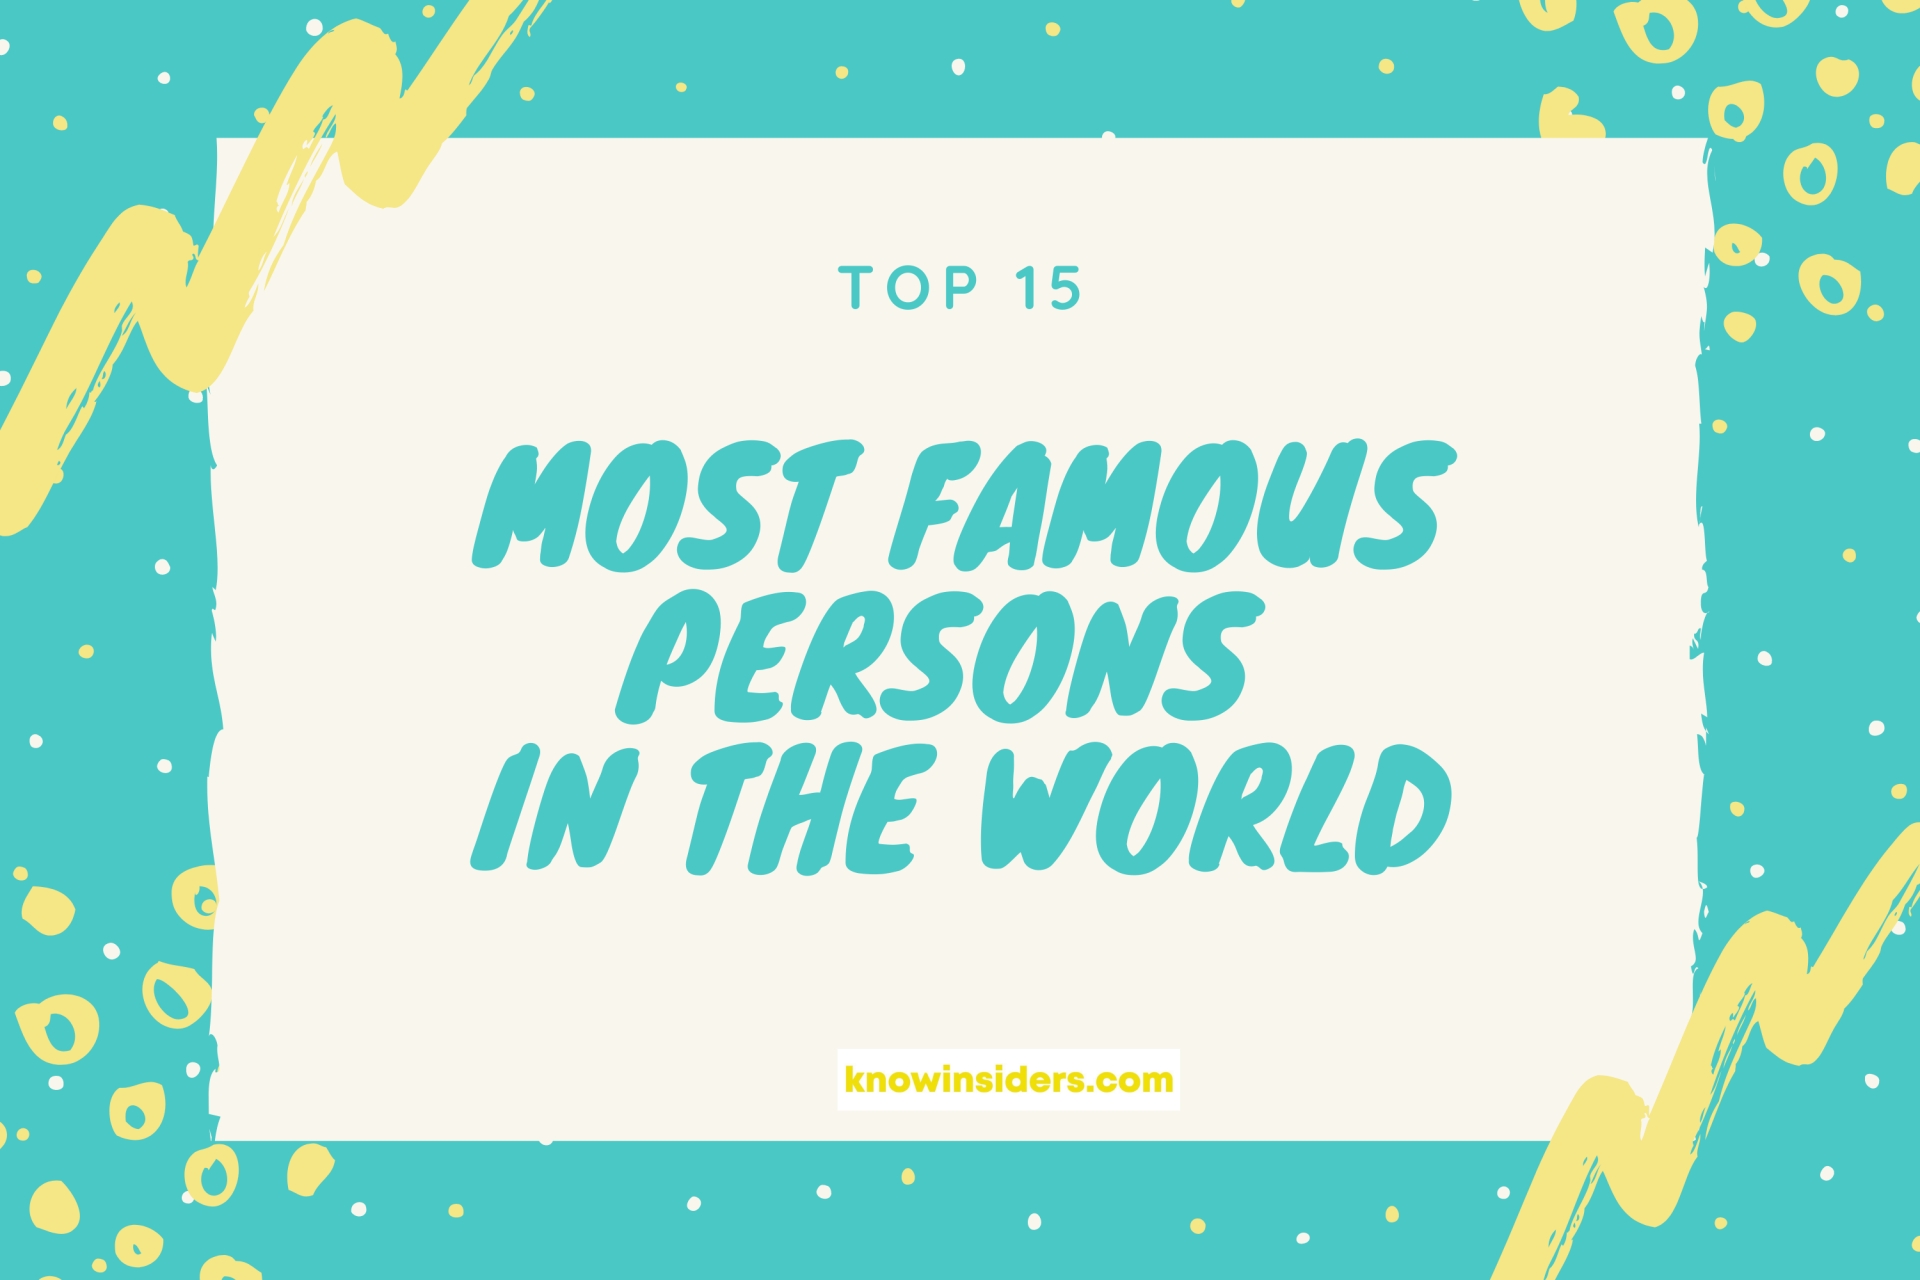 Top 15 Most Famous Persons In The World For 2021/2022